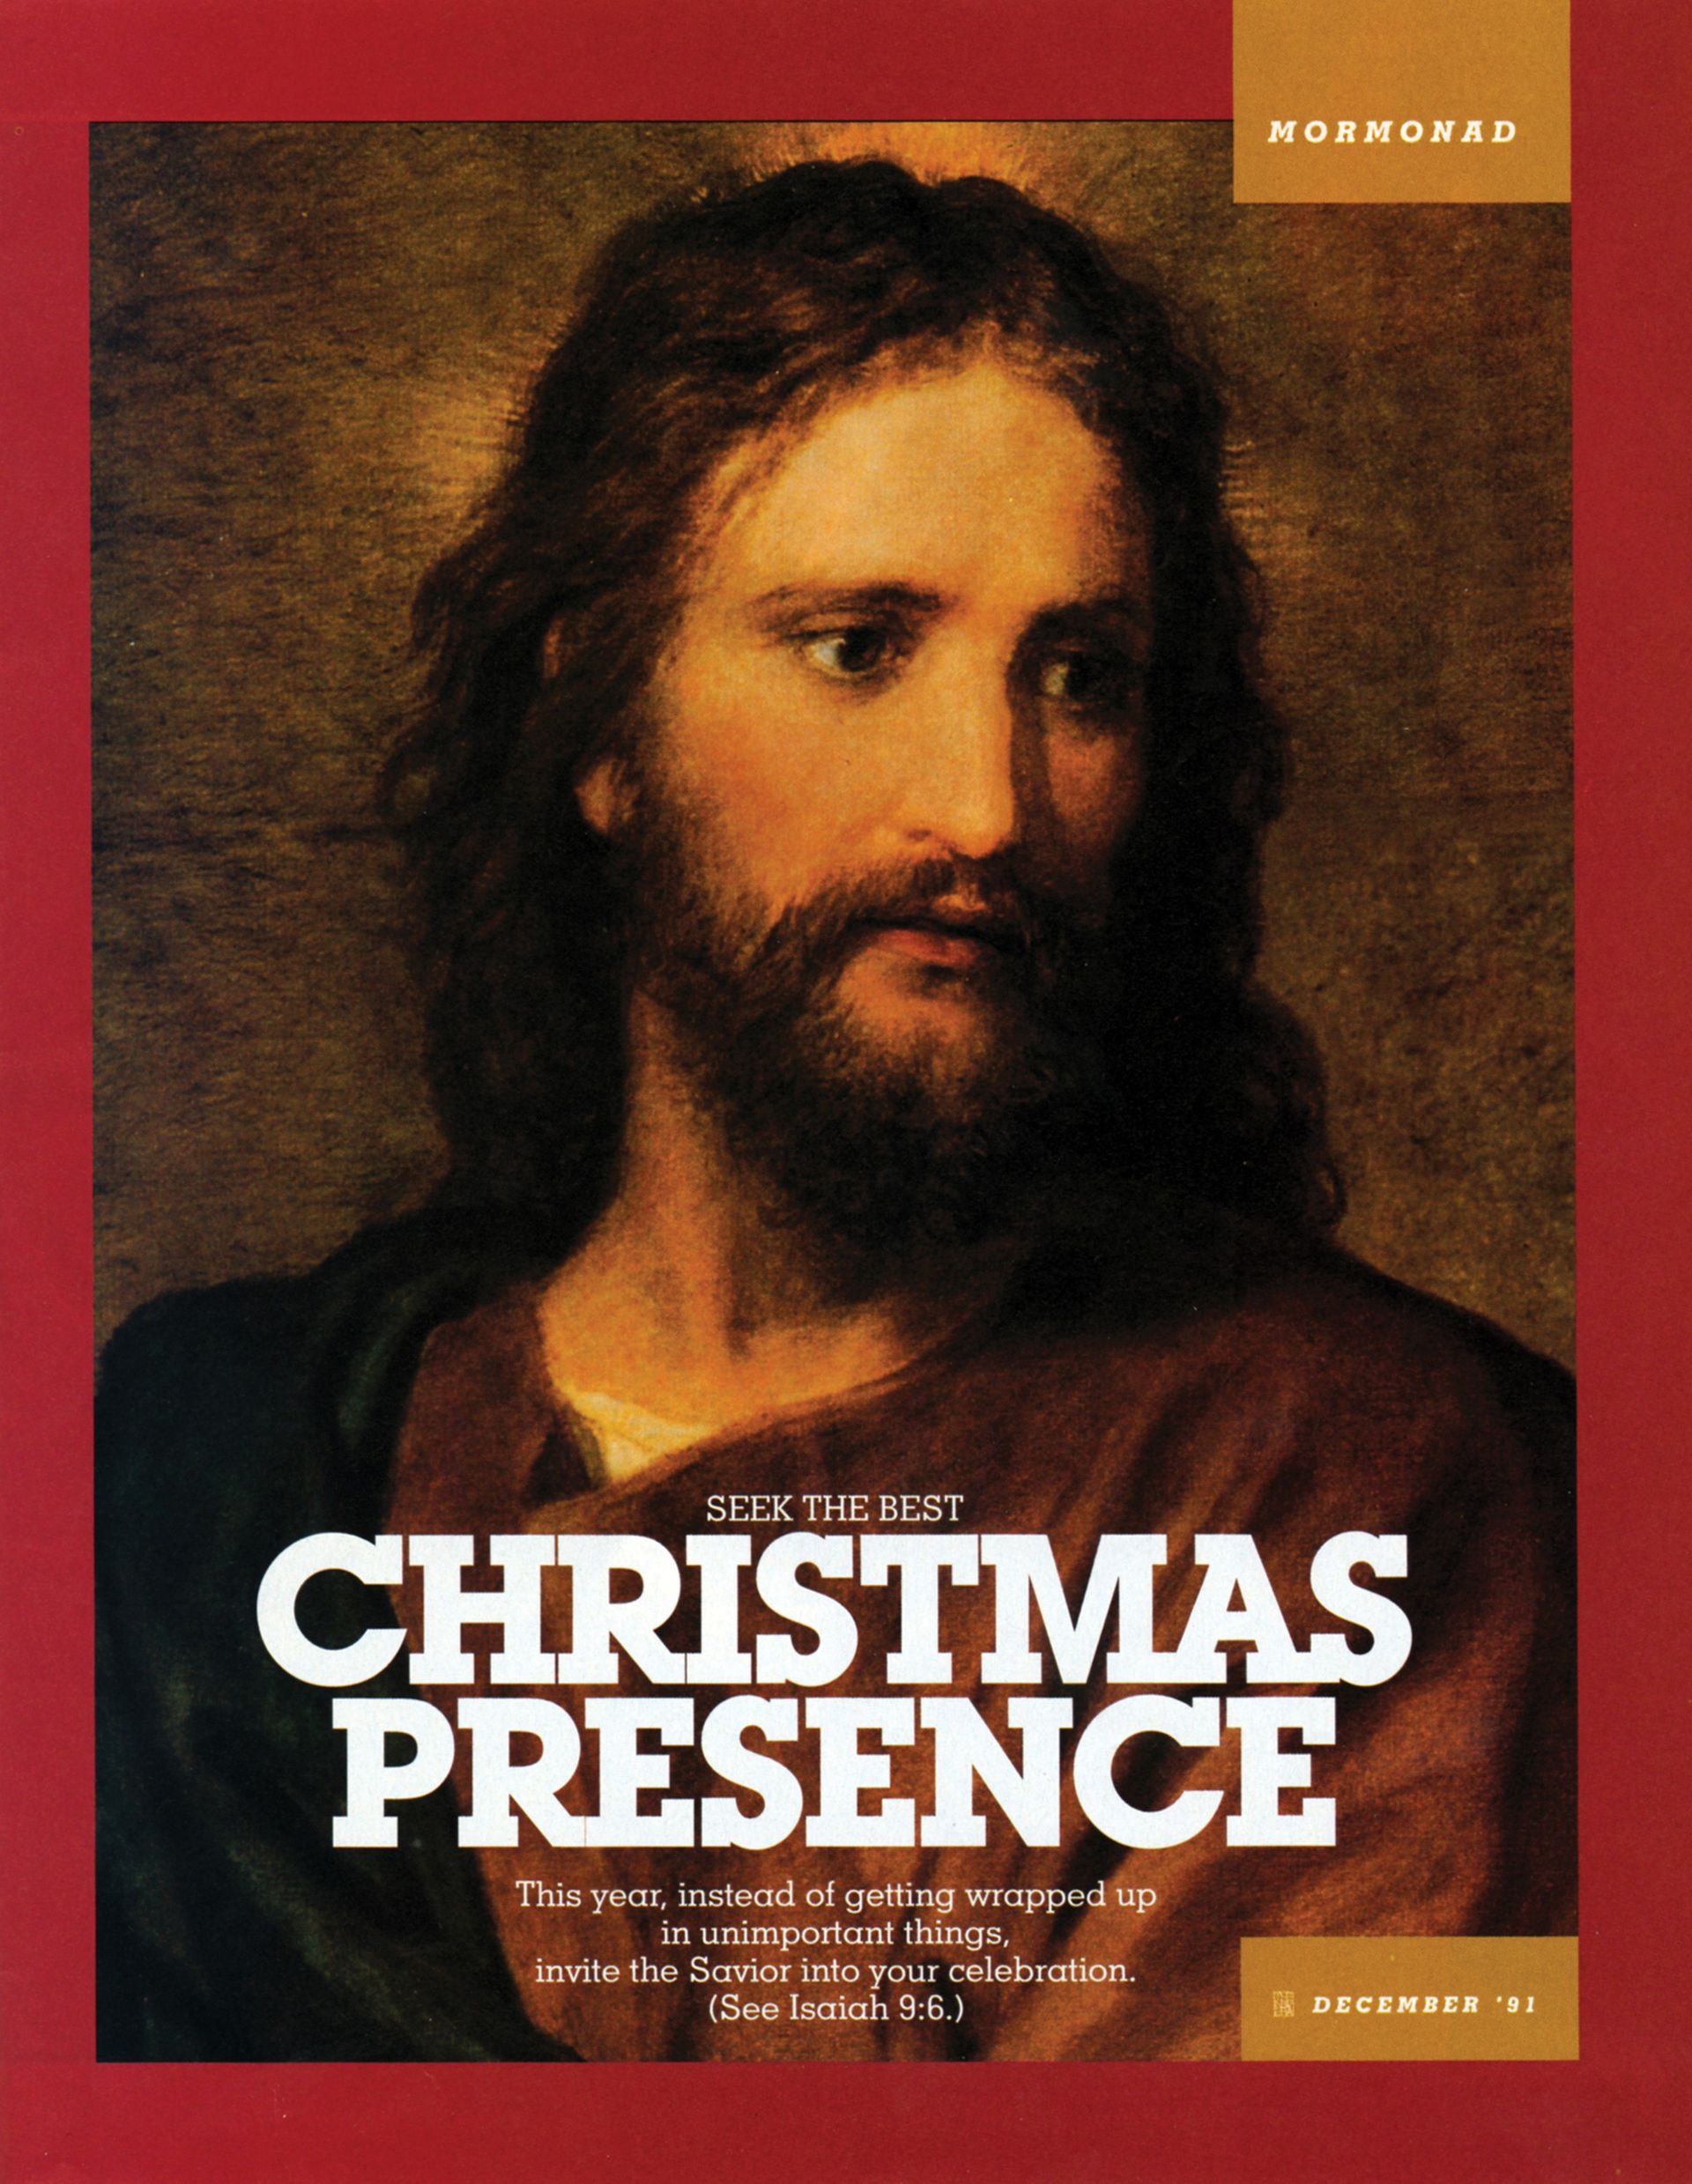 Seek the Best Christmas Presence. This year, instead of getting wrapped up in unimportant things, invite the Savior into your celebration. (See Isaiah 9:6.) Dec. 1991 © undefined ipCode 1.